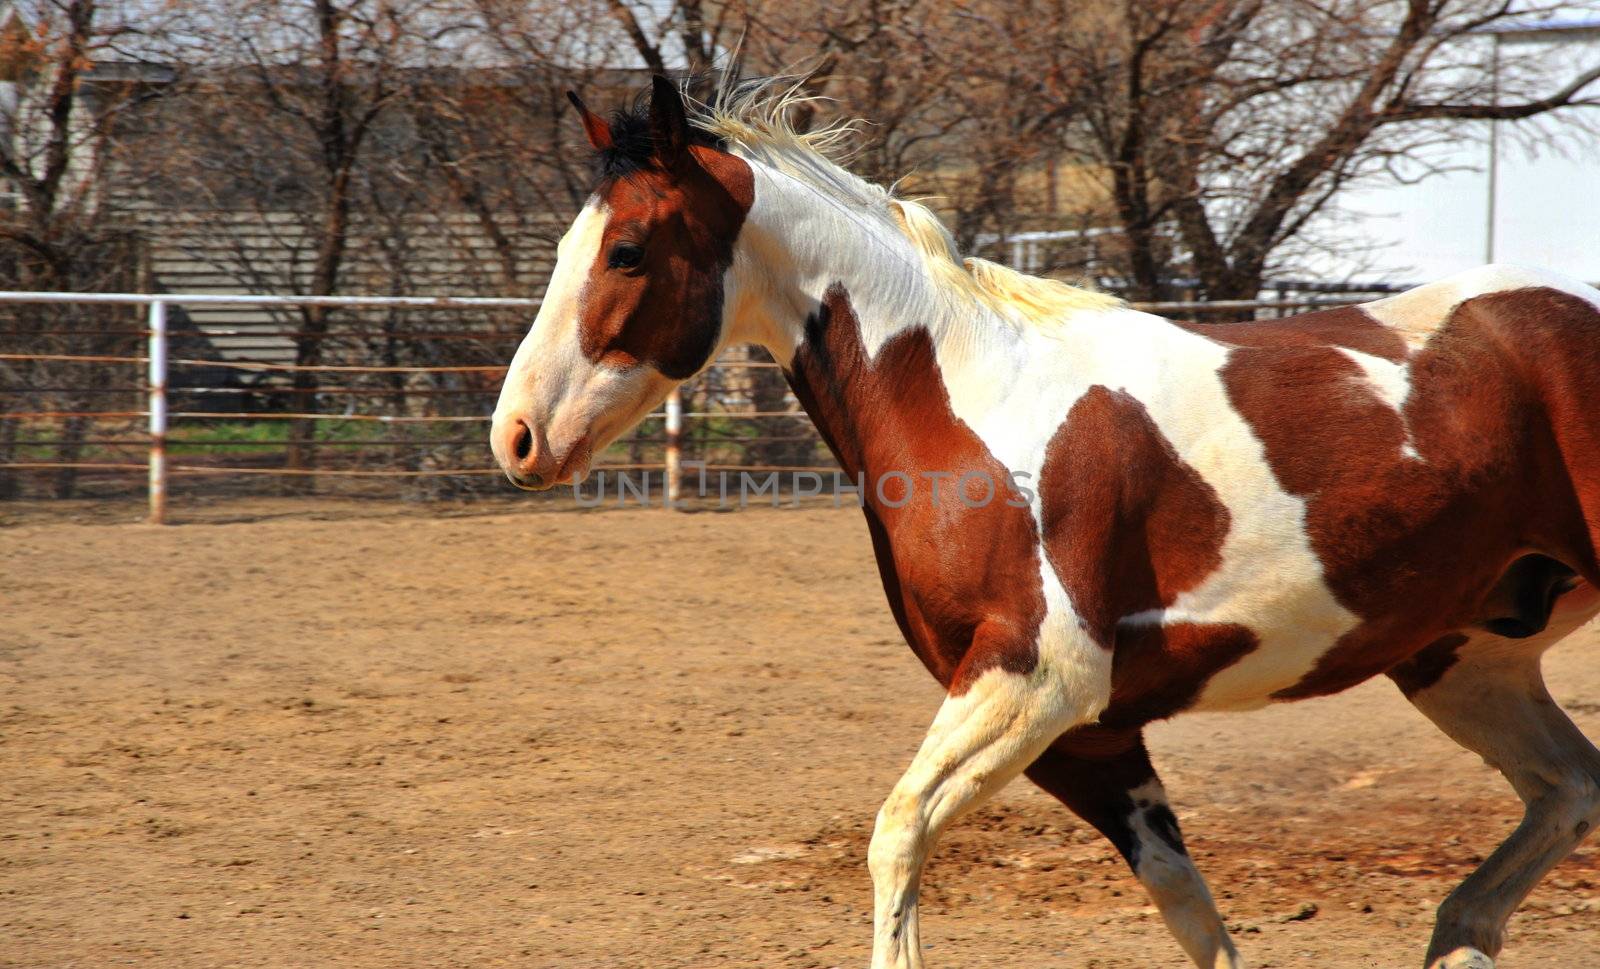 Horse running on the ranch outdoors.